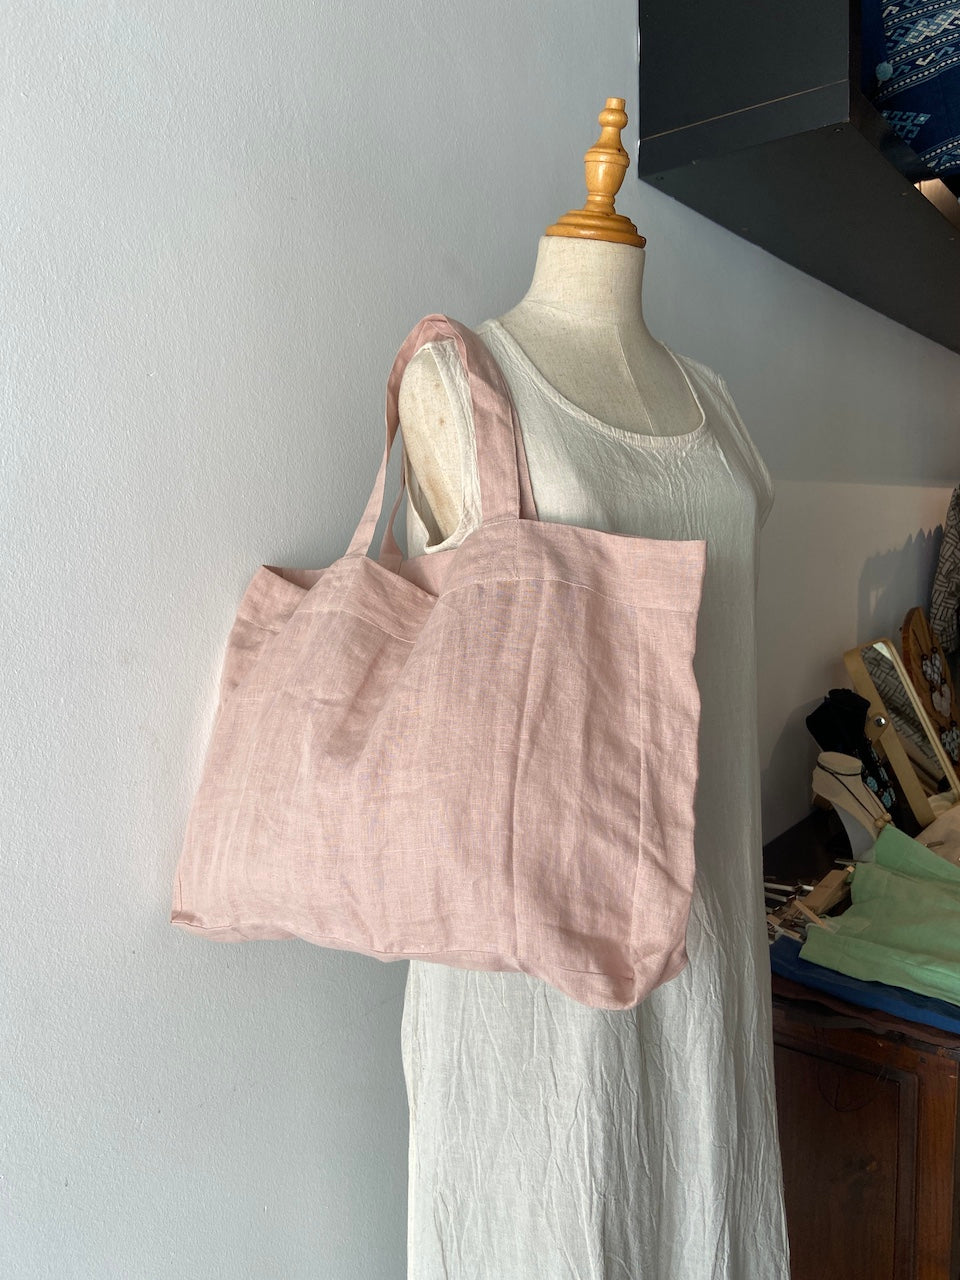 Linen Shopping Tote in Dusty Pink